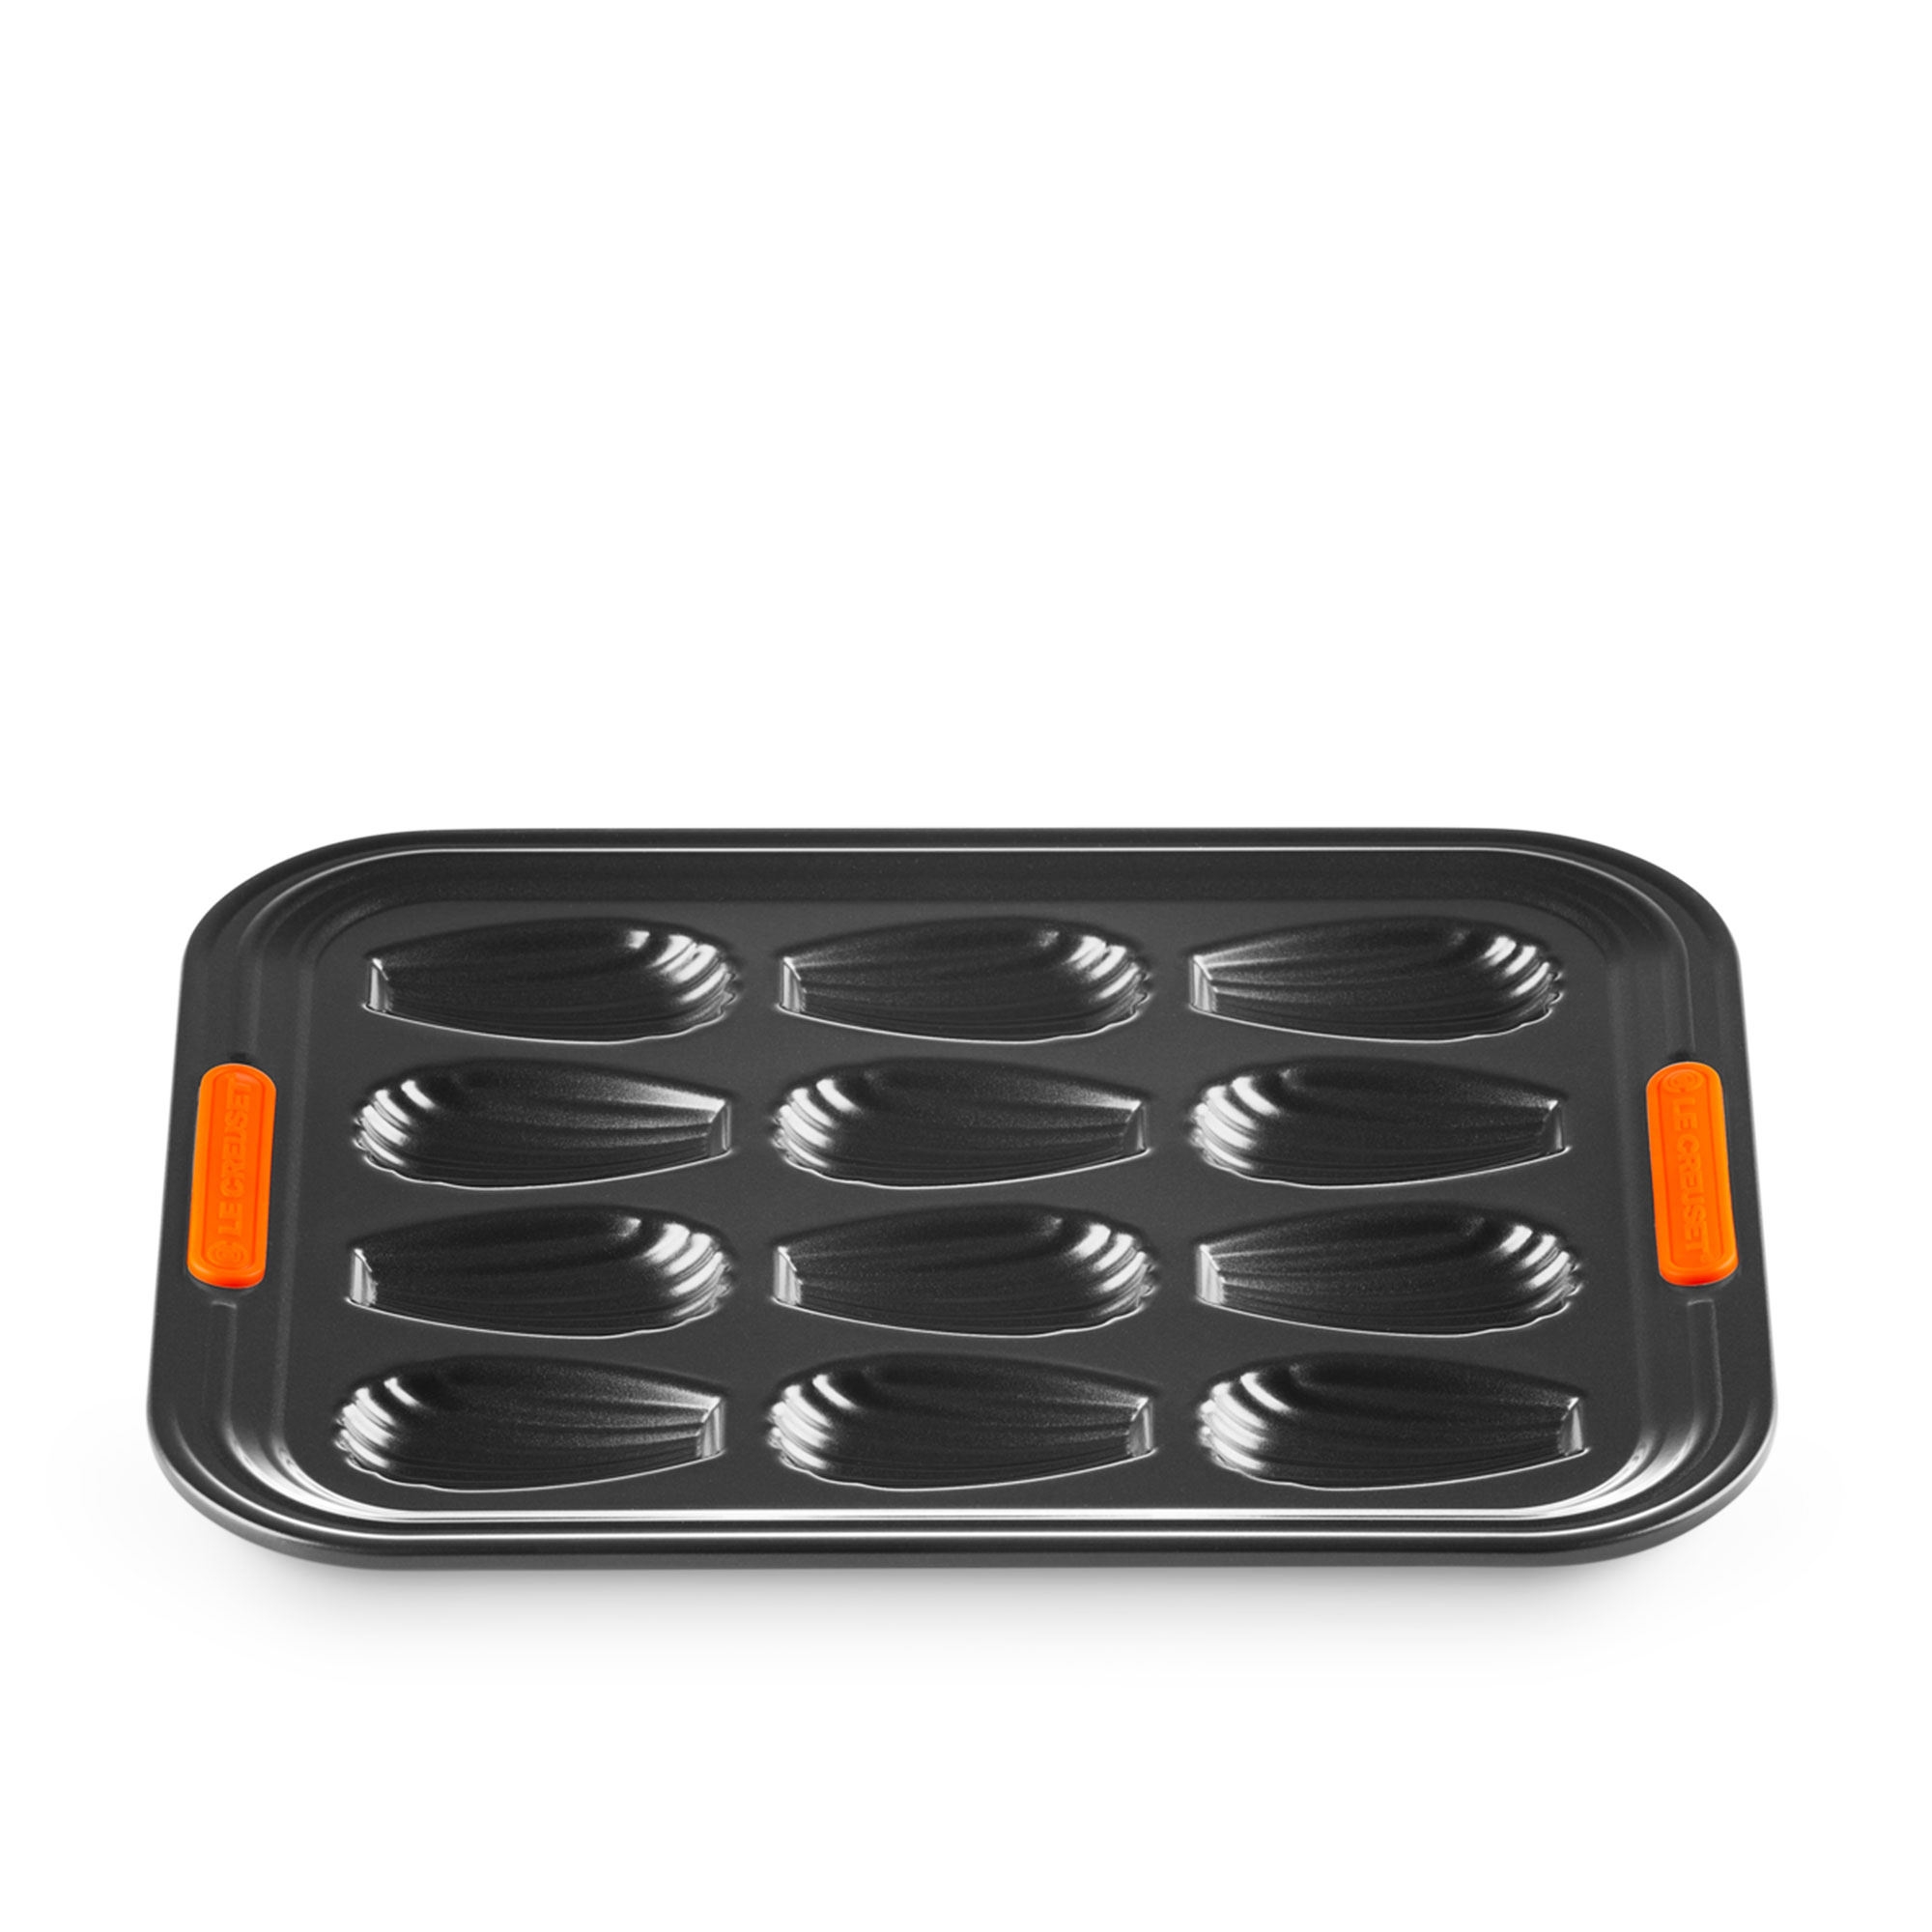 Le Creuset Toughened Non Stick Madeleine Tray 12 Cup Image 2